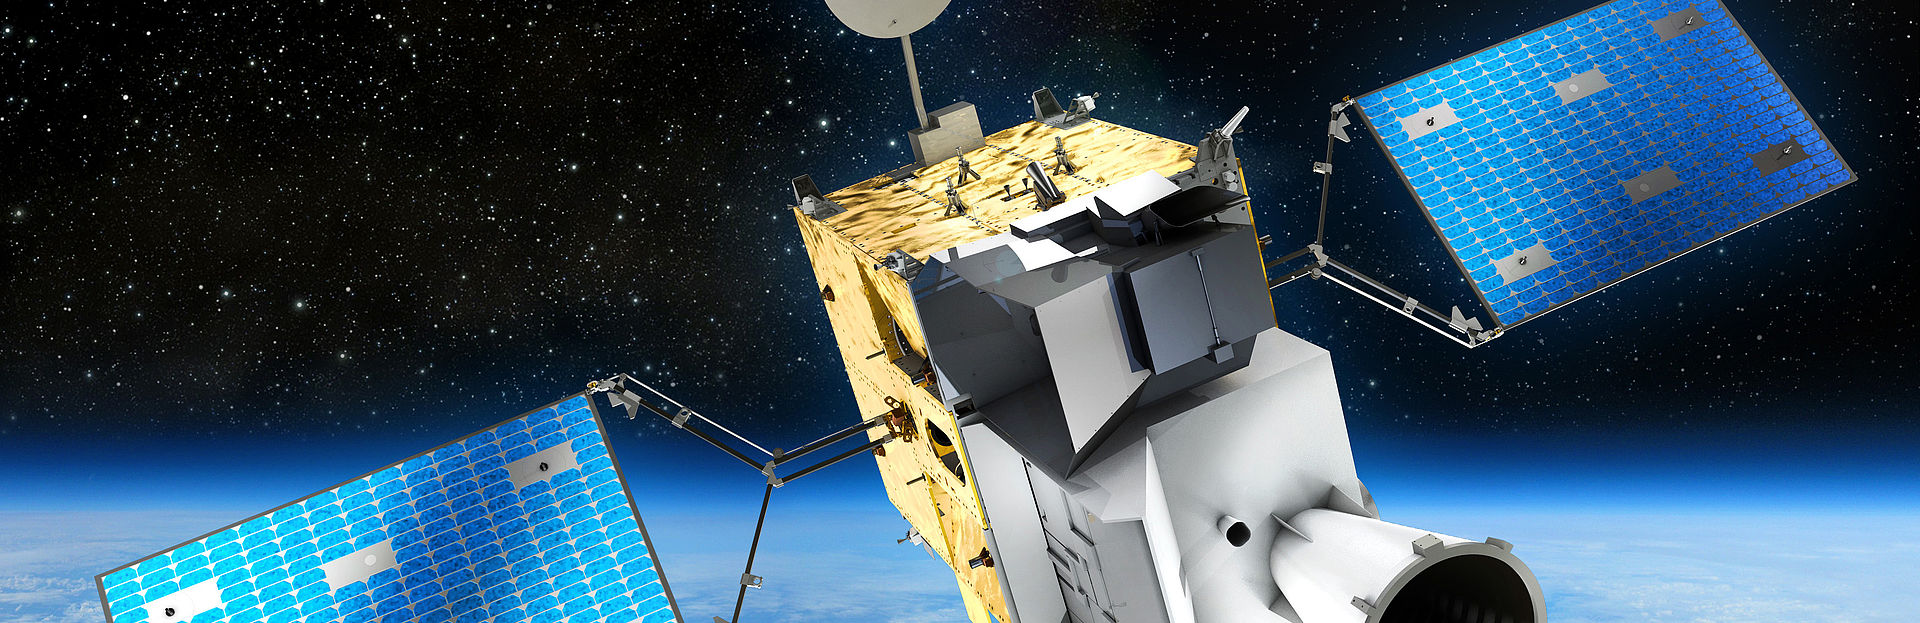 MTG Meteosat Third Generation: Taking a precise look at the atmosphere